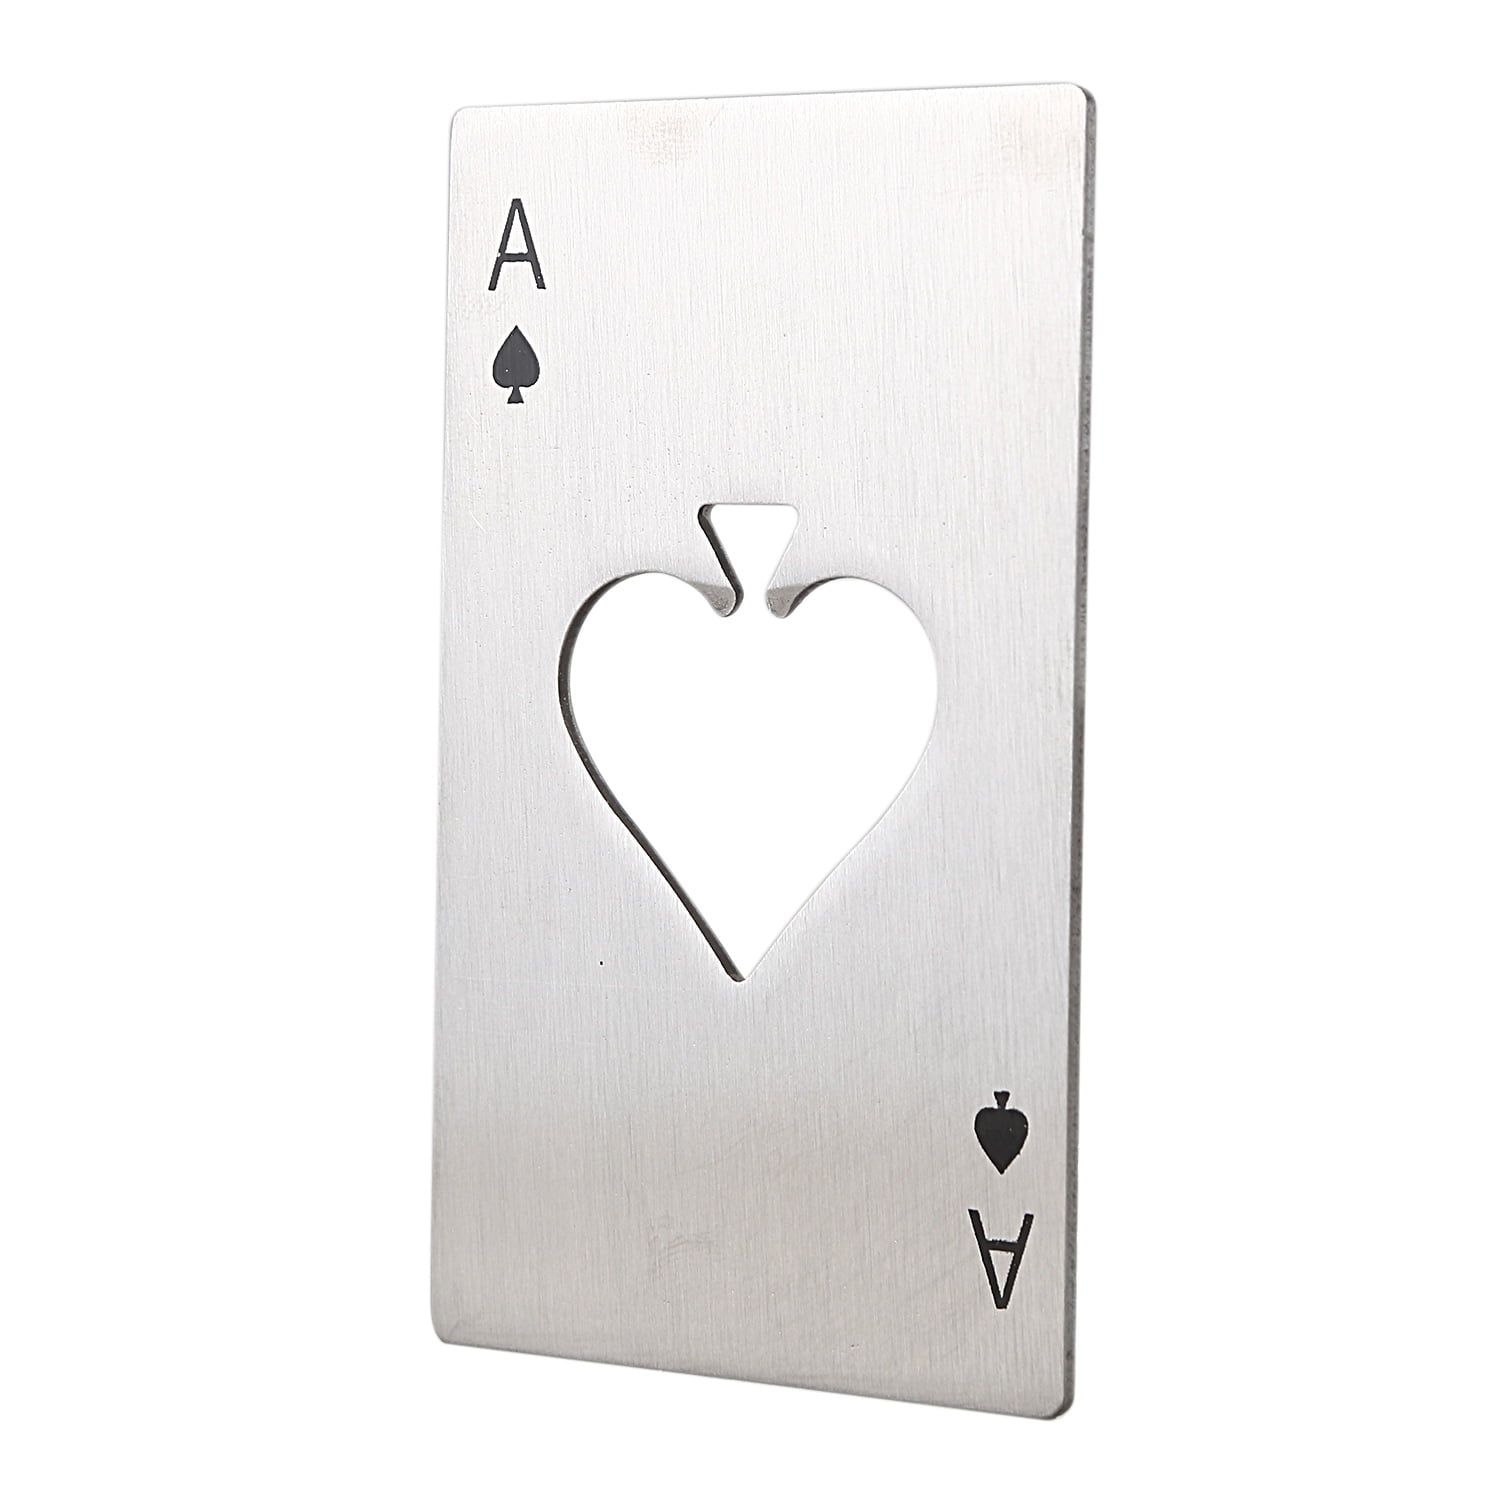 3Pcs Poker Playing Card Ace of Spades Stainless Steel Metal Beer Bottle Opener 